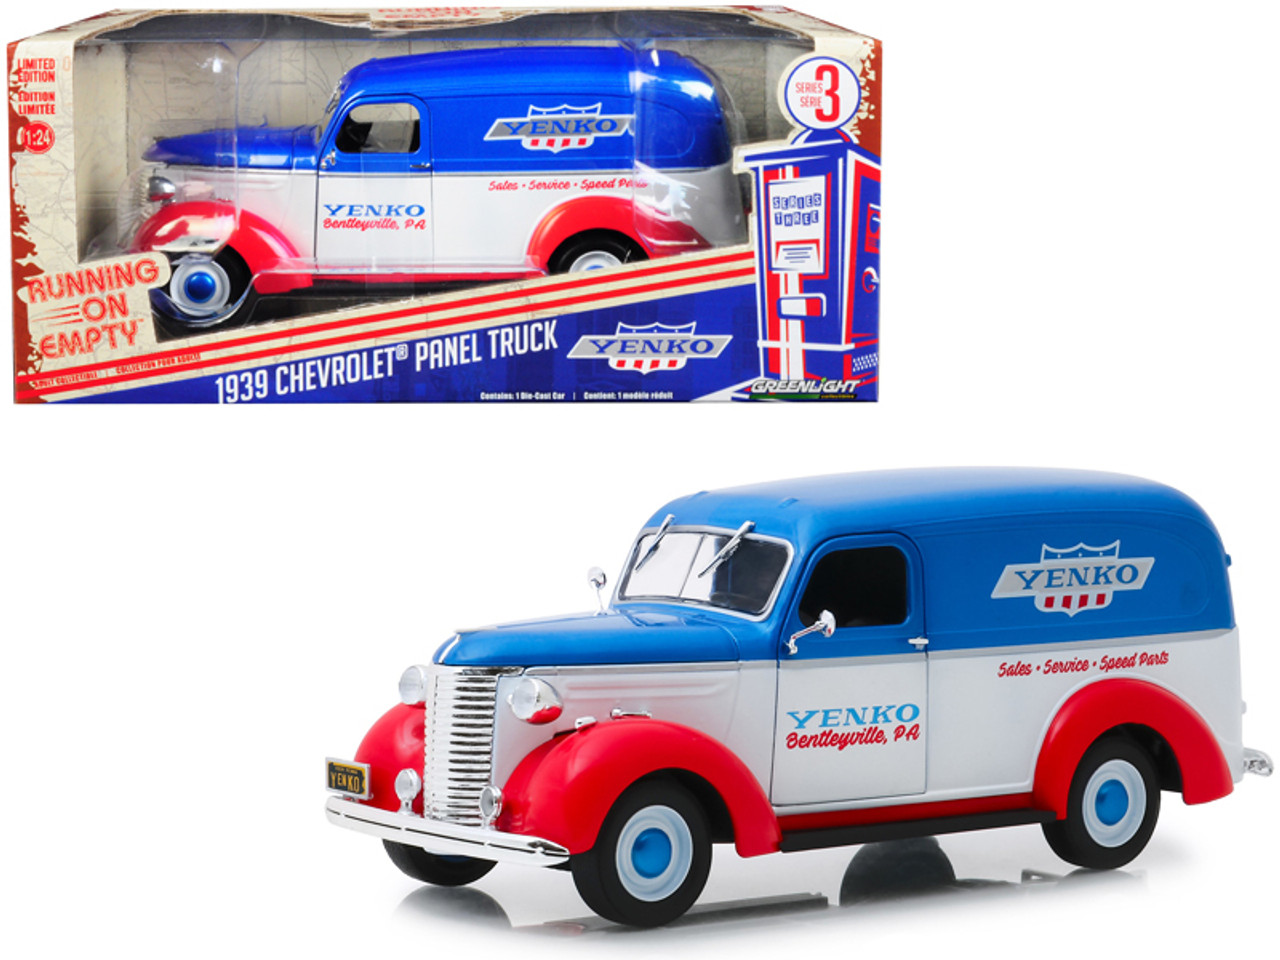 1939 Chevrolet Panel Truck "Yenko Sales and Service" "Running on Empty" Series 3 1/24 Diecast Model Car by Greenlight